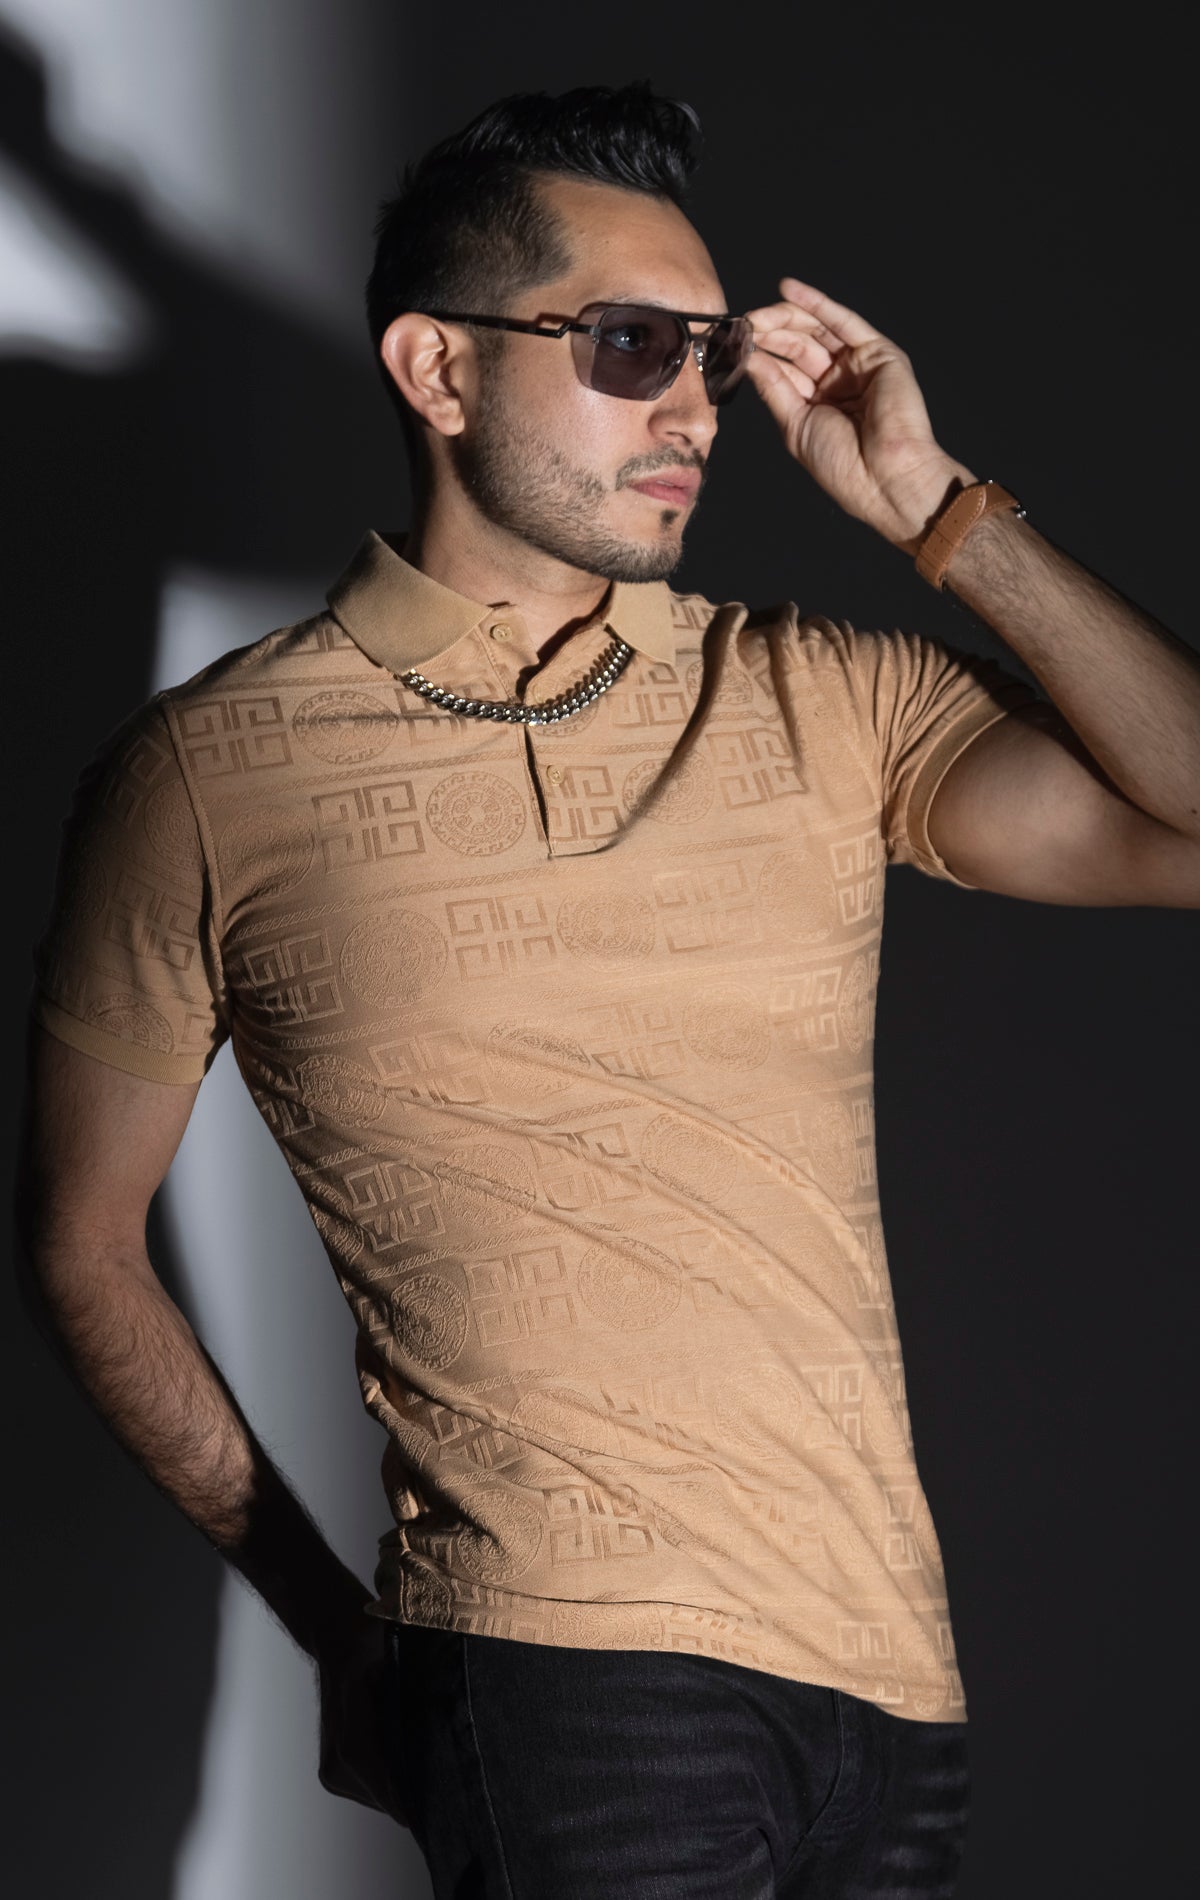  Men's regular-fit polo shirt with a Roman pattern. Available in black, white, and khaki.